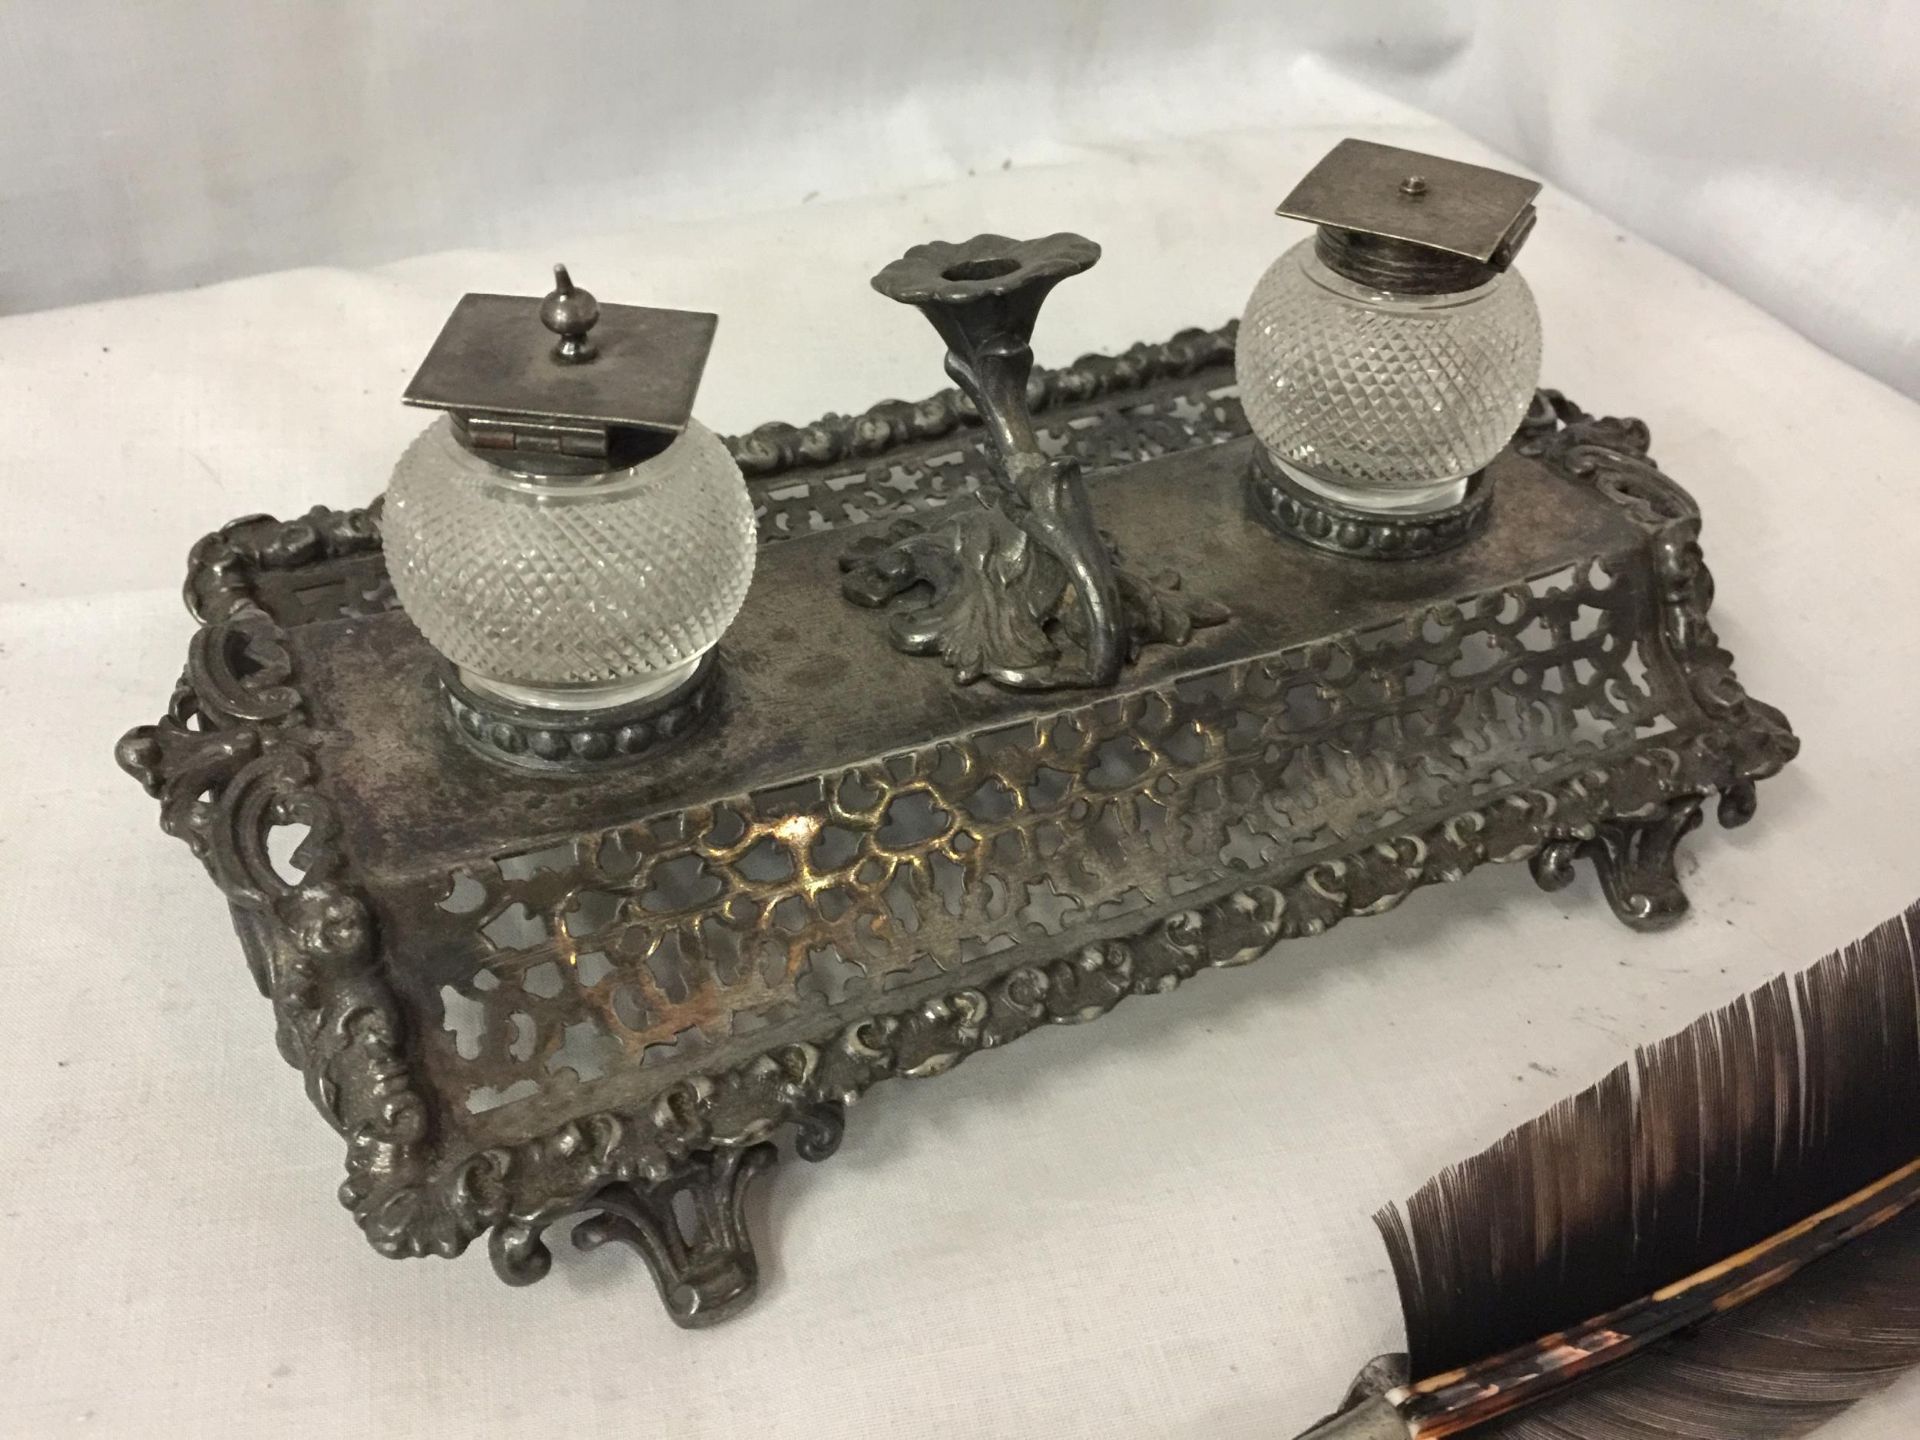 AN ORNATE FILIGREE STYLE SILVER PLATE DESK SET COMPRISING TWO GLASS INK WELLS WITH SILVER PLATE LIDS - Image 3 of 4